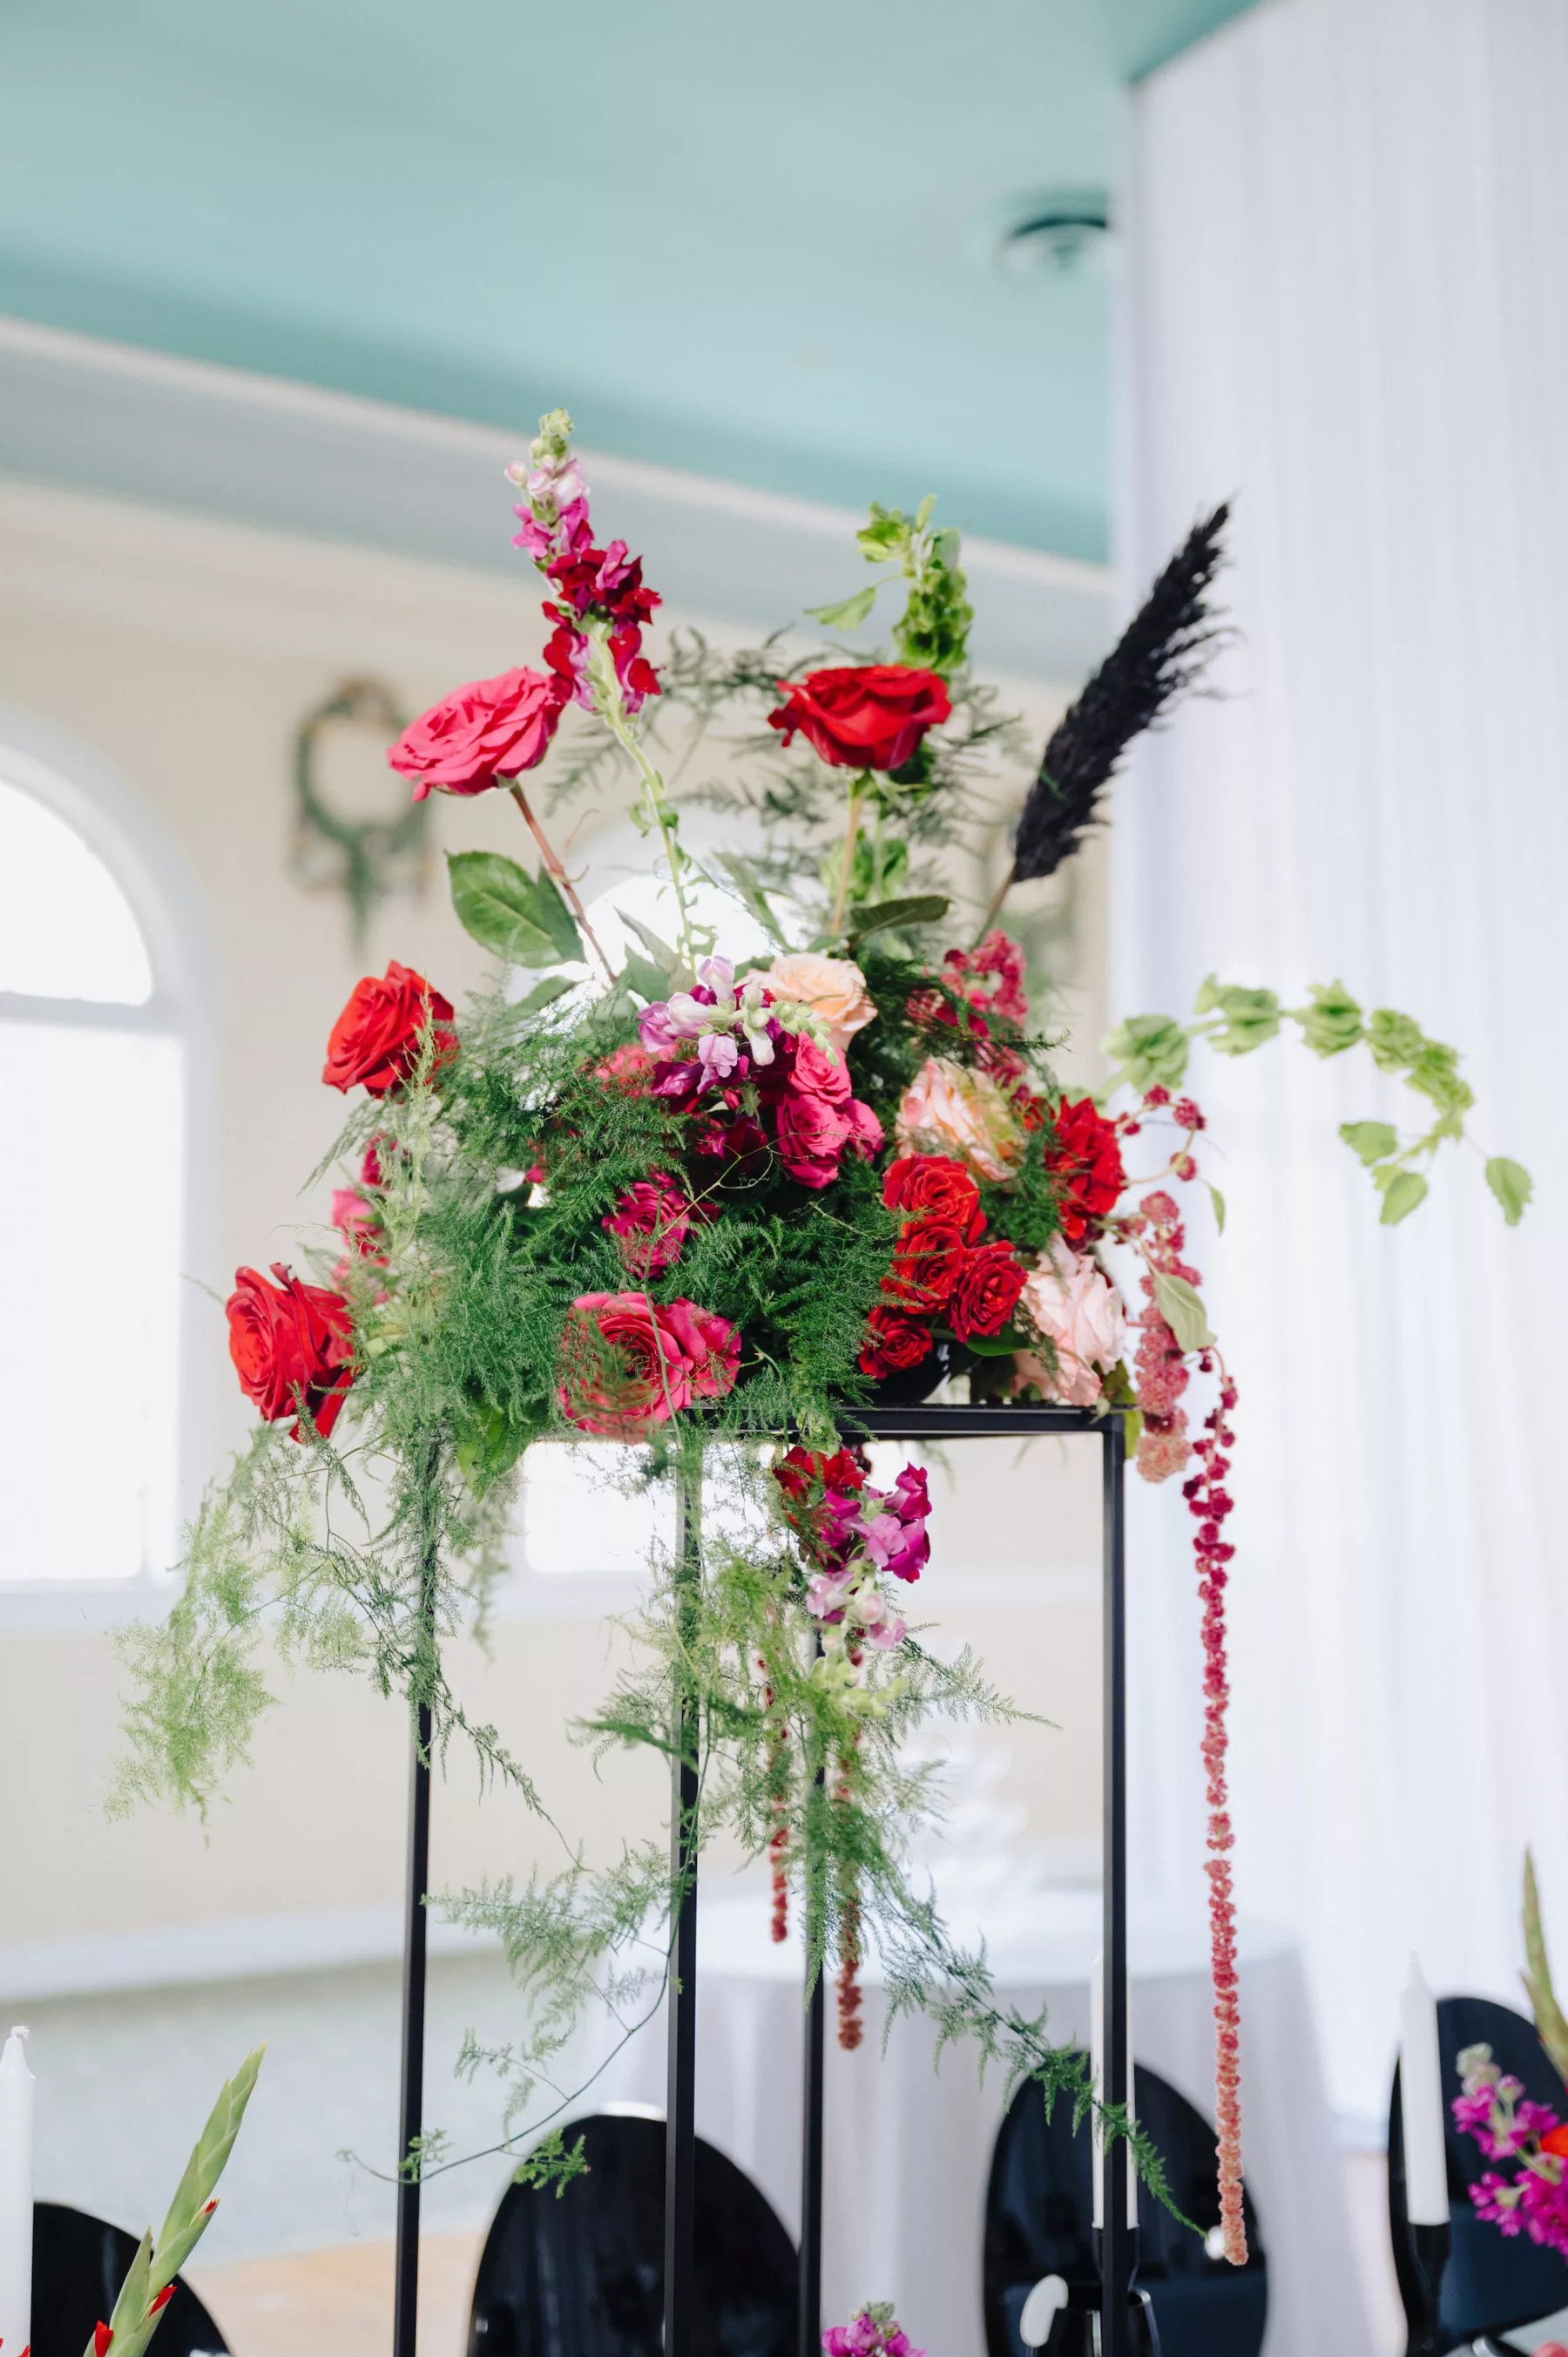 Tall Modern Black Flower Stand with Red and Pink Roses, Greenery, and Black Pampas Grass Wedding Reception Centerpiece Decor Ideas | Ybor Florist Save The Date Florida